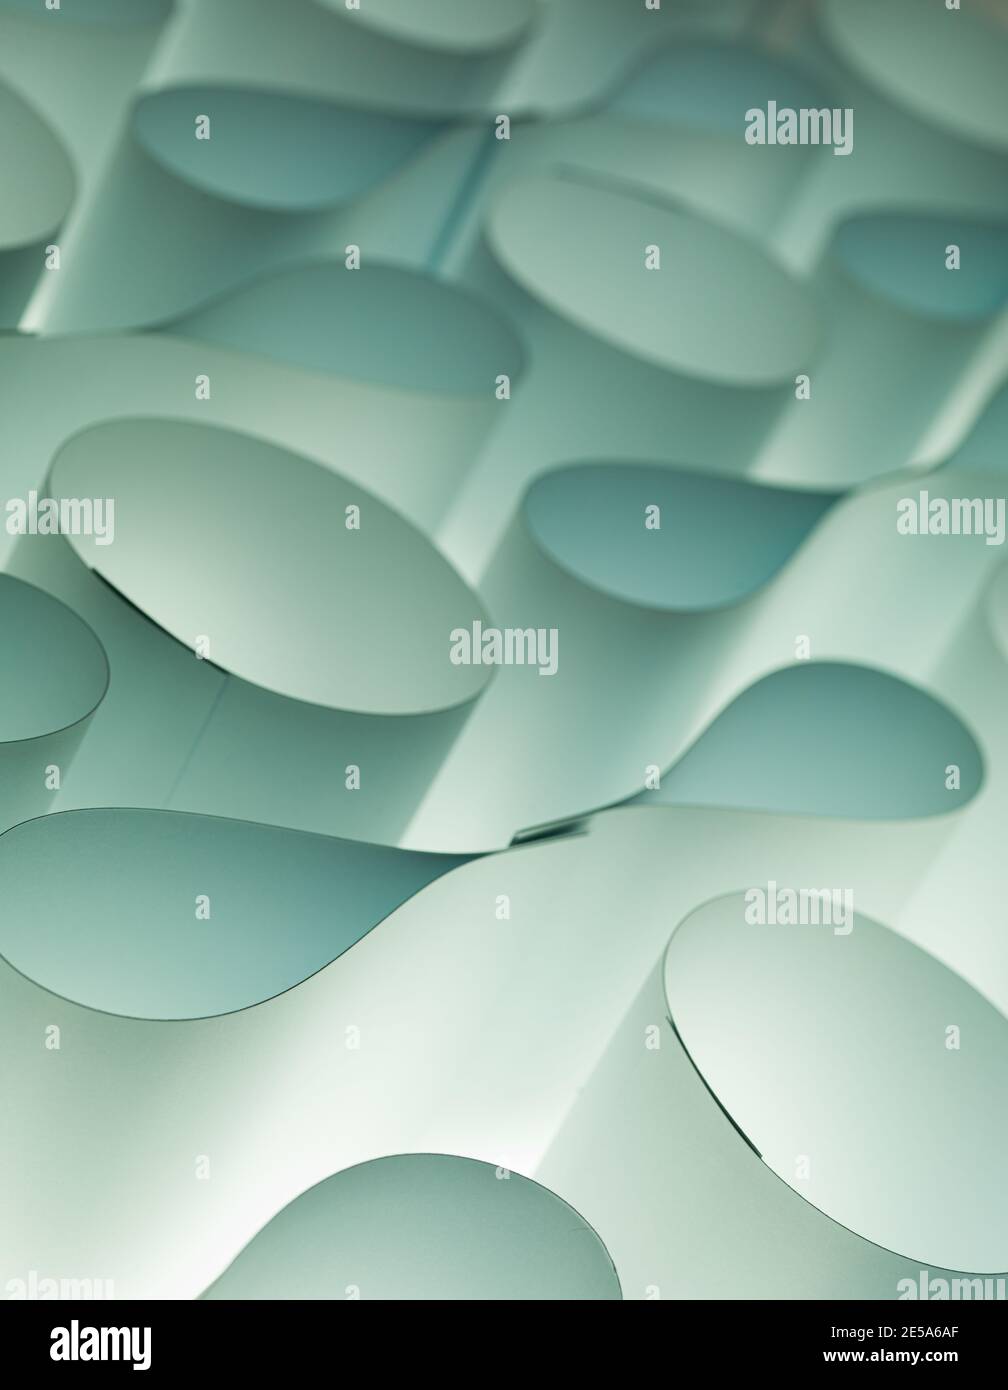 Futuristic abstract 3D background made of paper cylinders and droplets blue turquoise Stock Photo